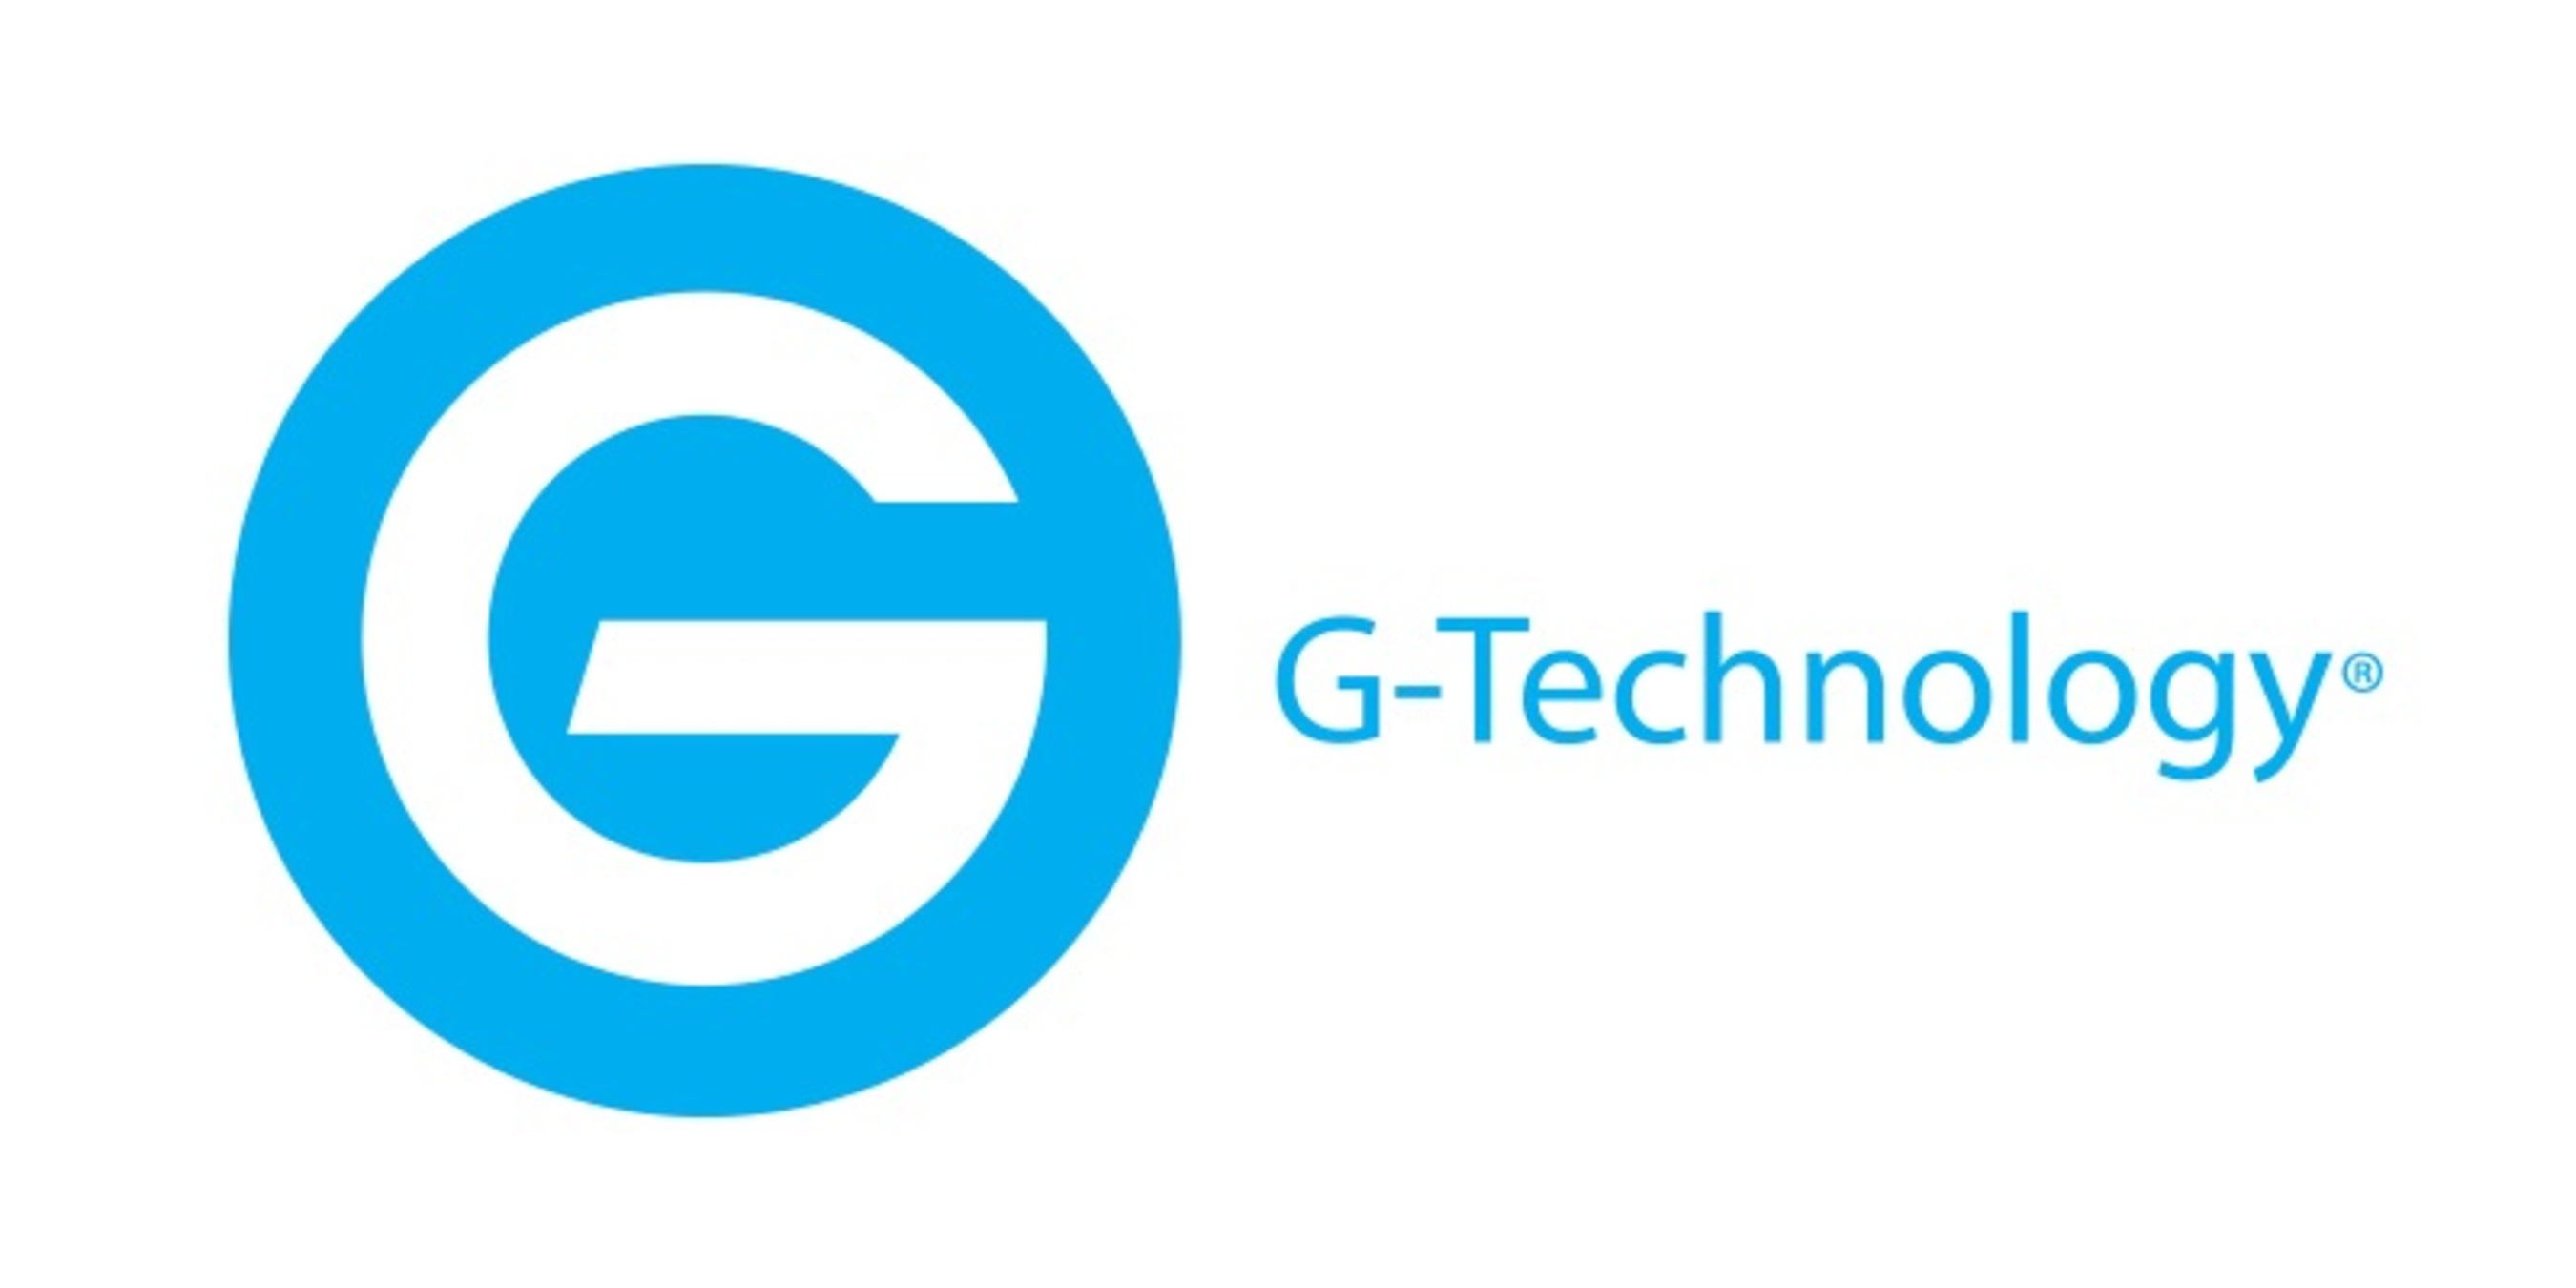 G-Technology, developers of innovative storage solutions for those looking to push creativity beyond the limits.